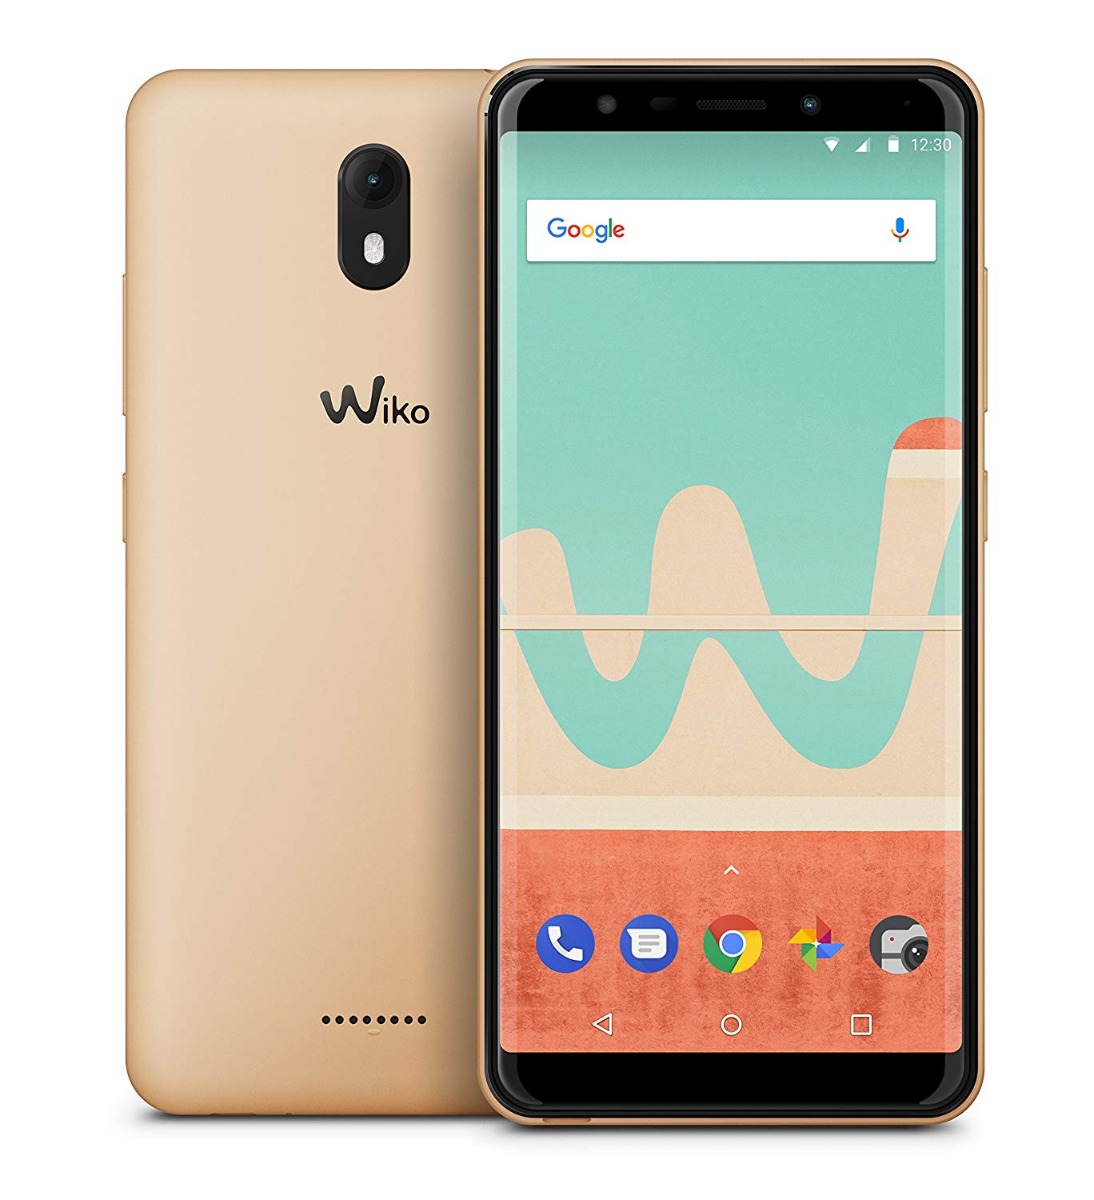 Wiko View Go Gold 5 7in 18 9 Wikomobile Wikwp130golst 6943279416933